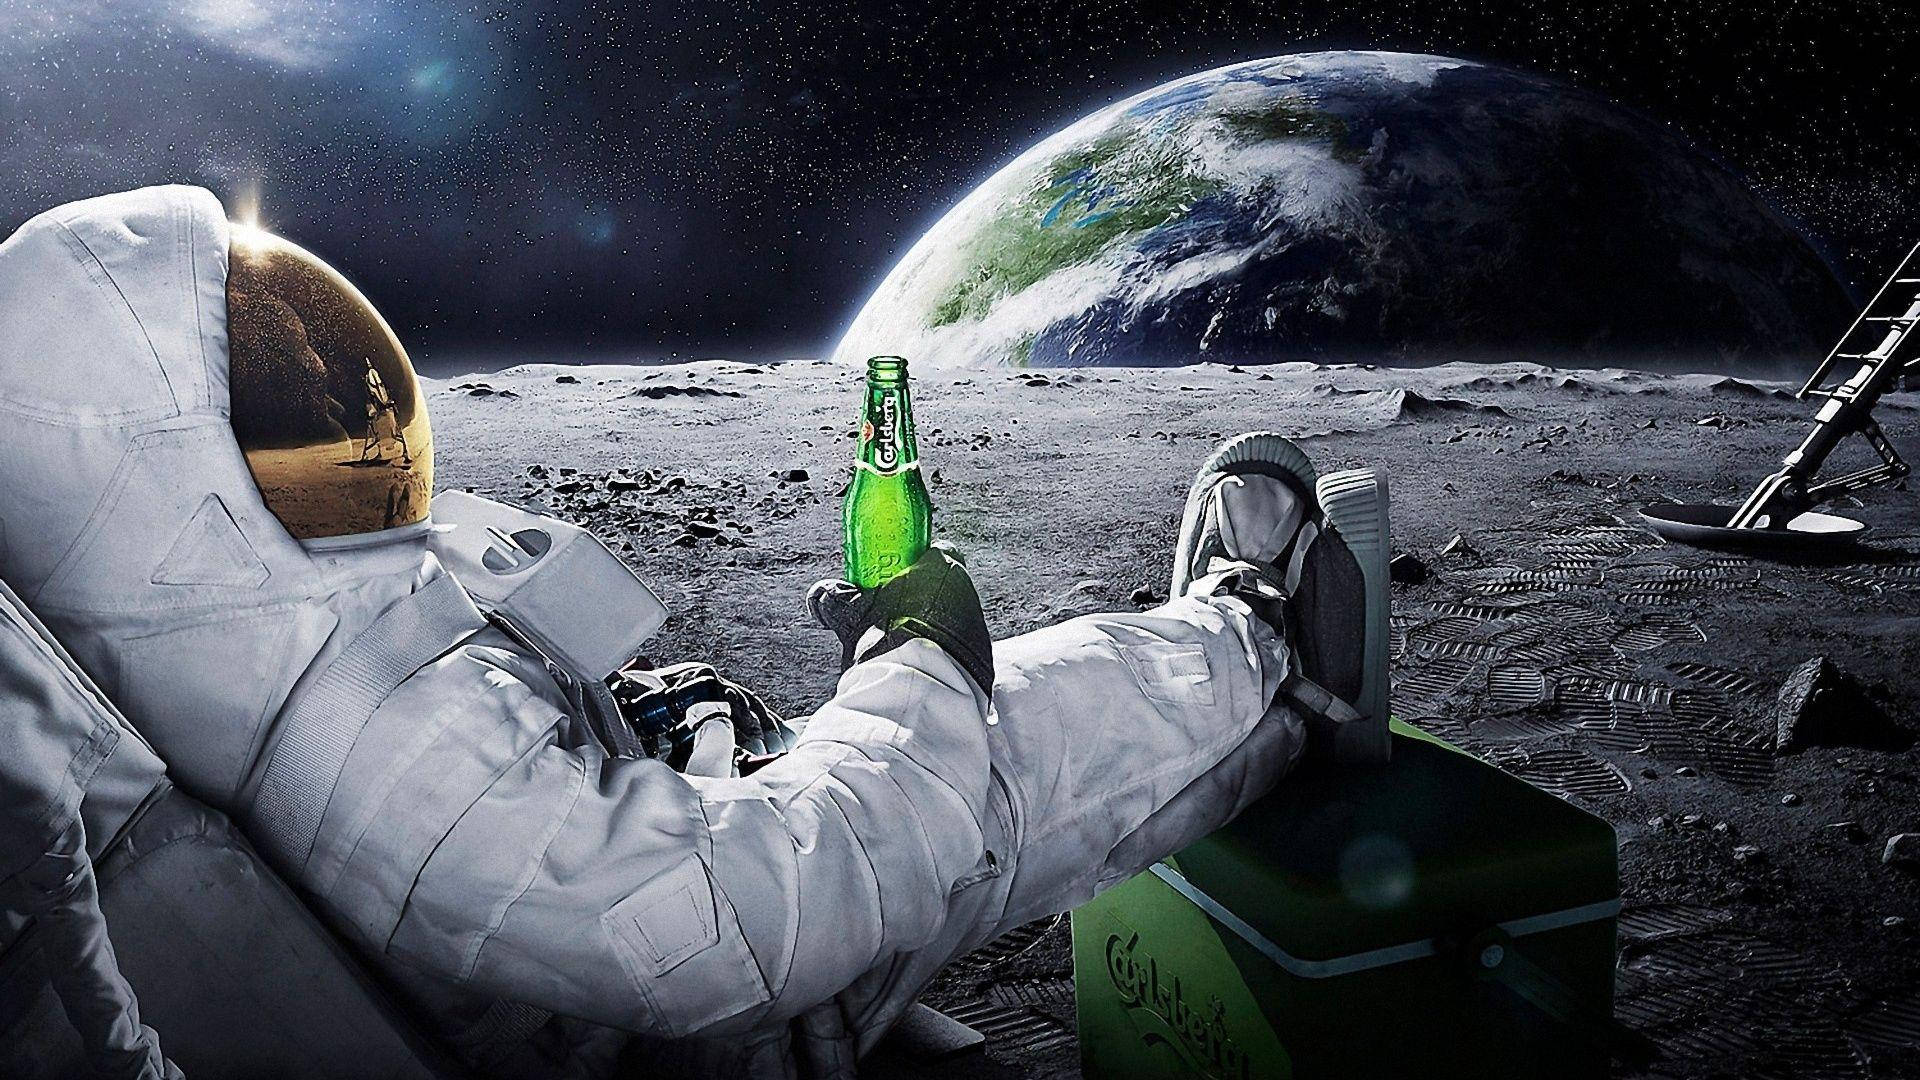 1080p Hd Astronaut Relaxing On Moon Background